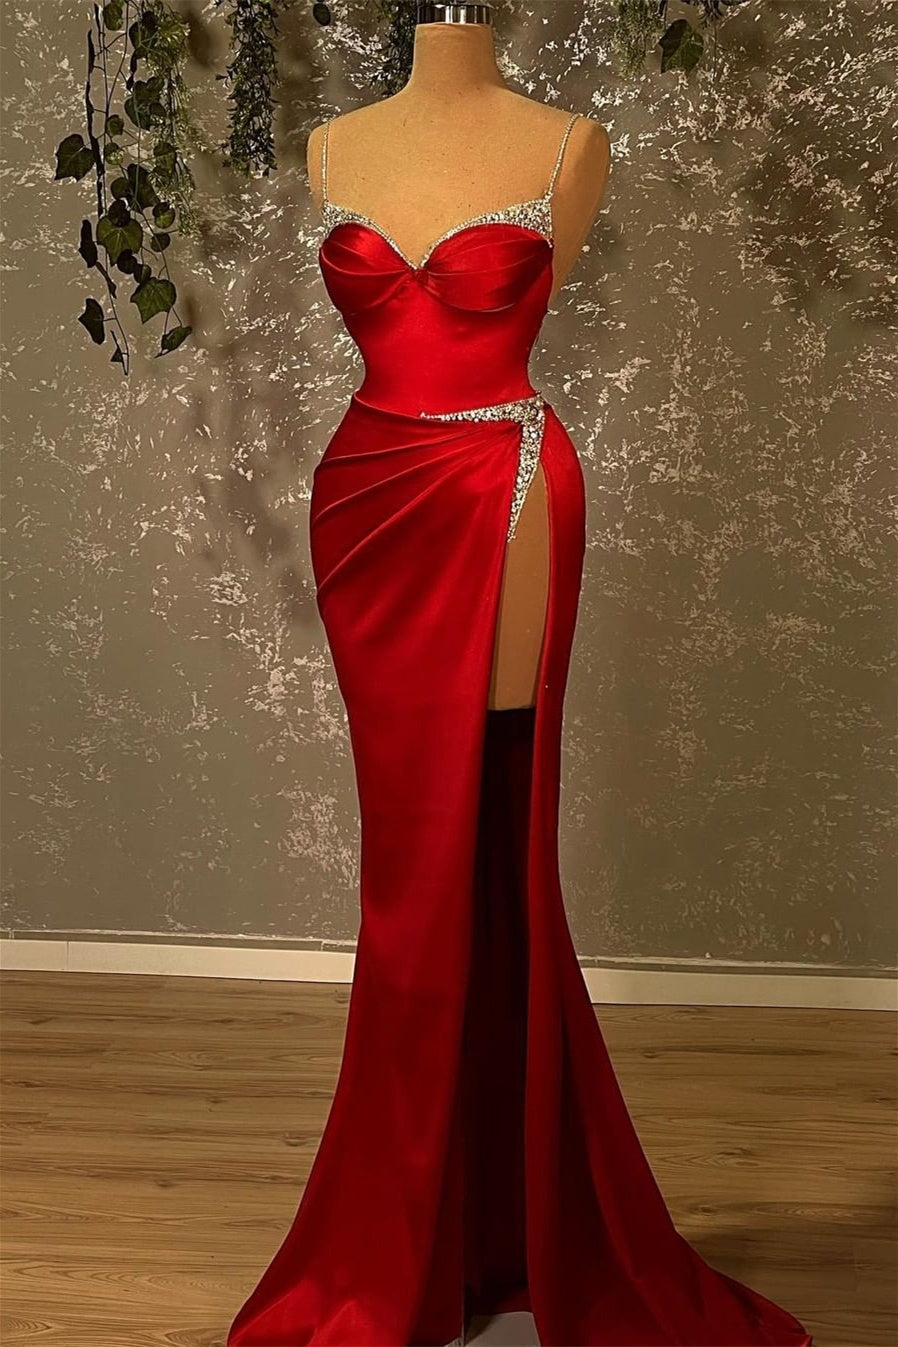 Mermaid Spaghetti Strap Sweetheart Floor-length Sleeveless Red High Split Corset Prom Dresses outfit, Party Dresses Shop